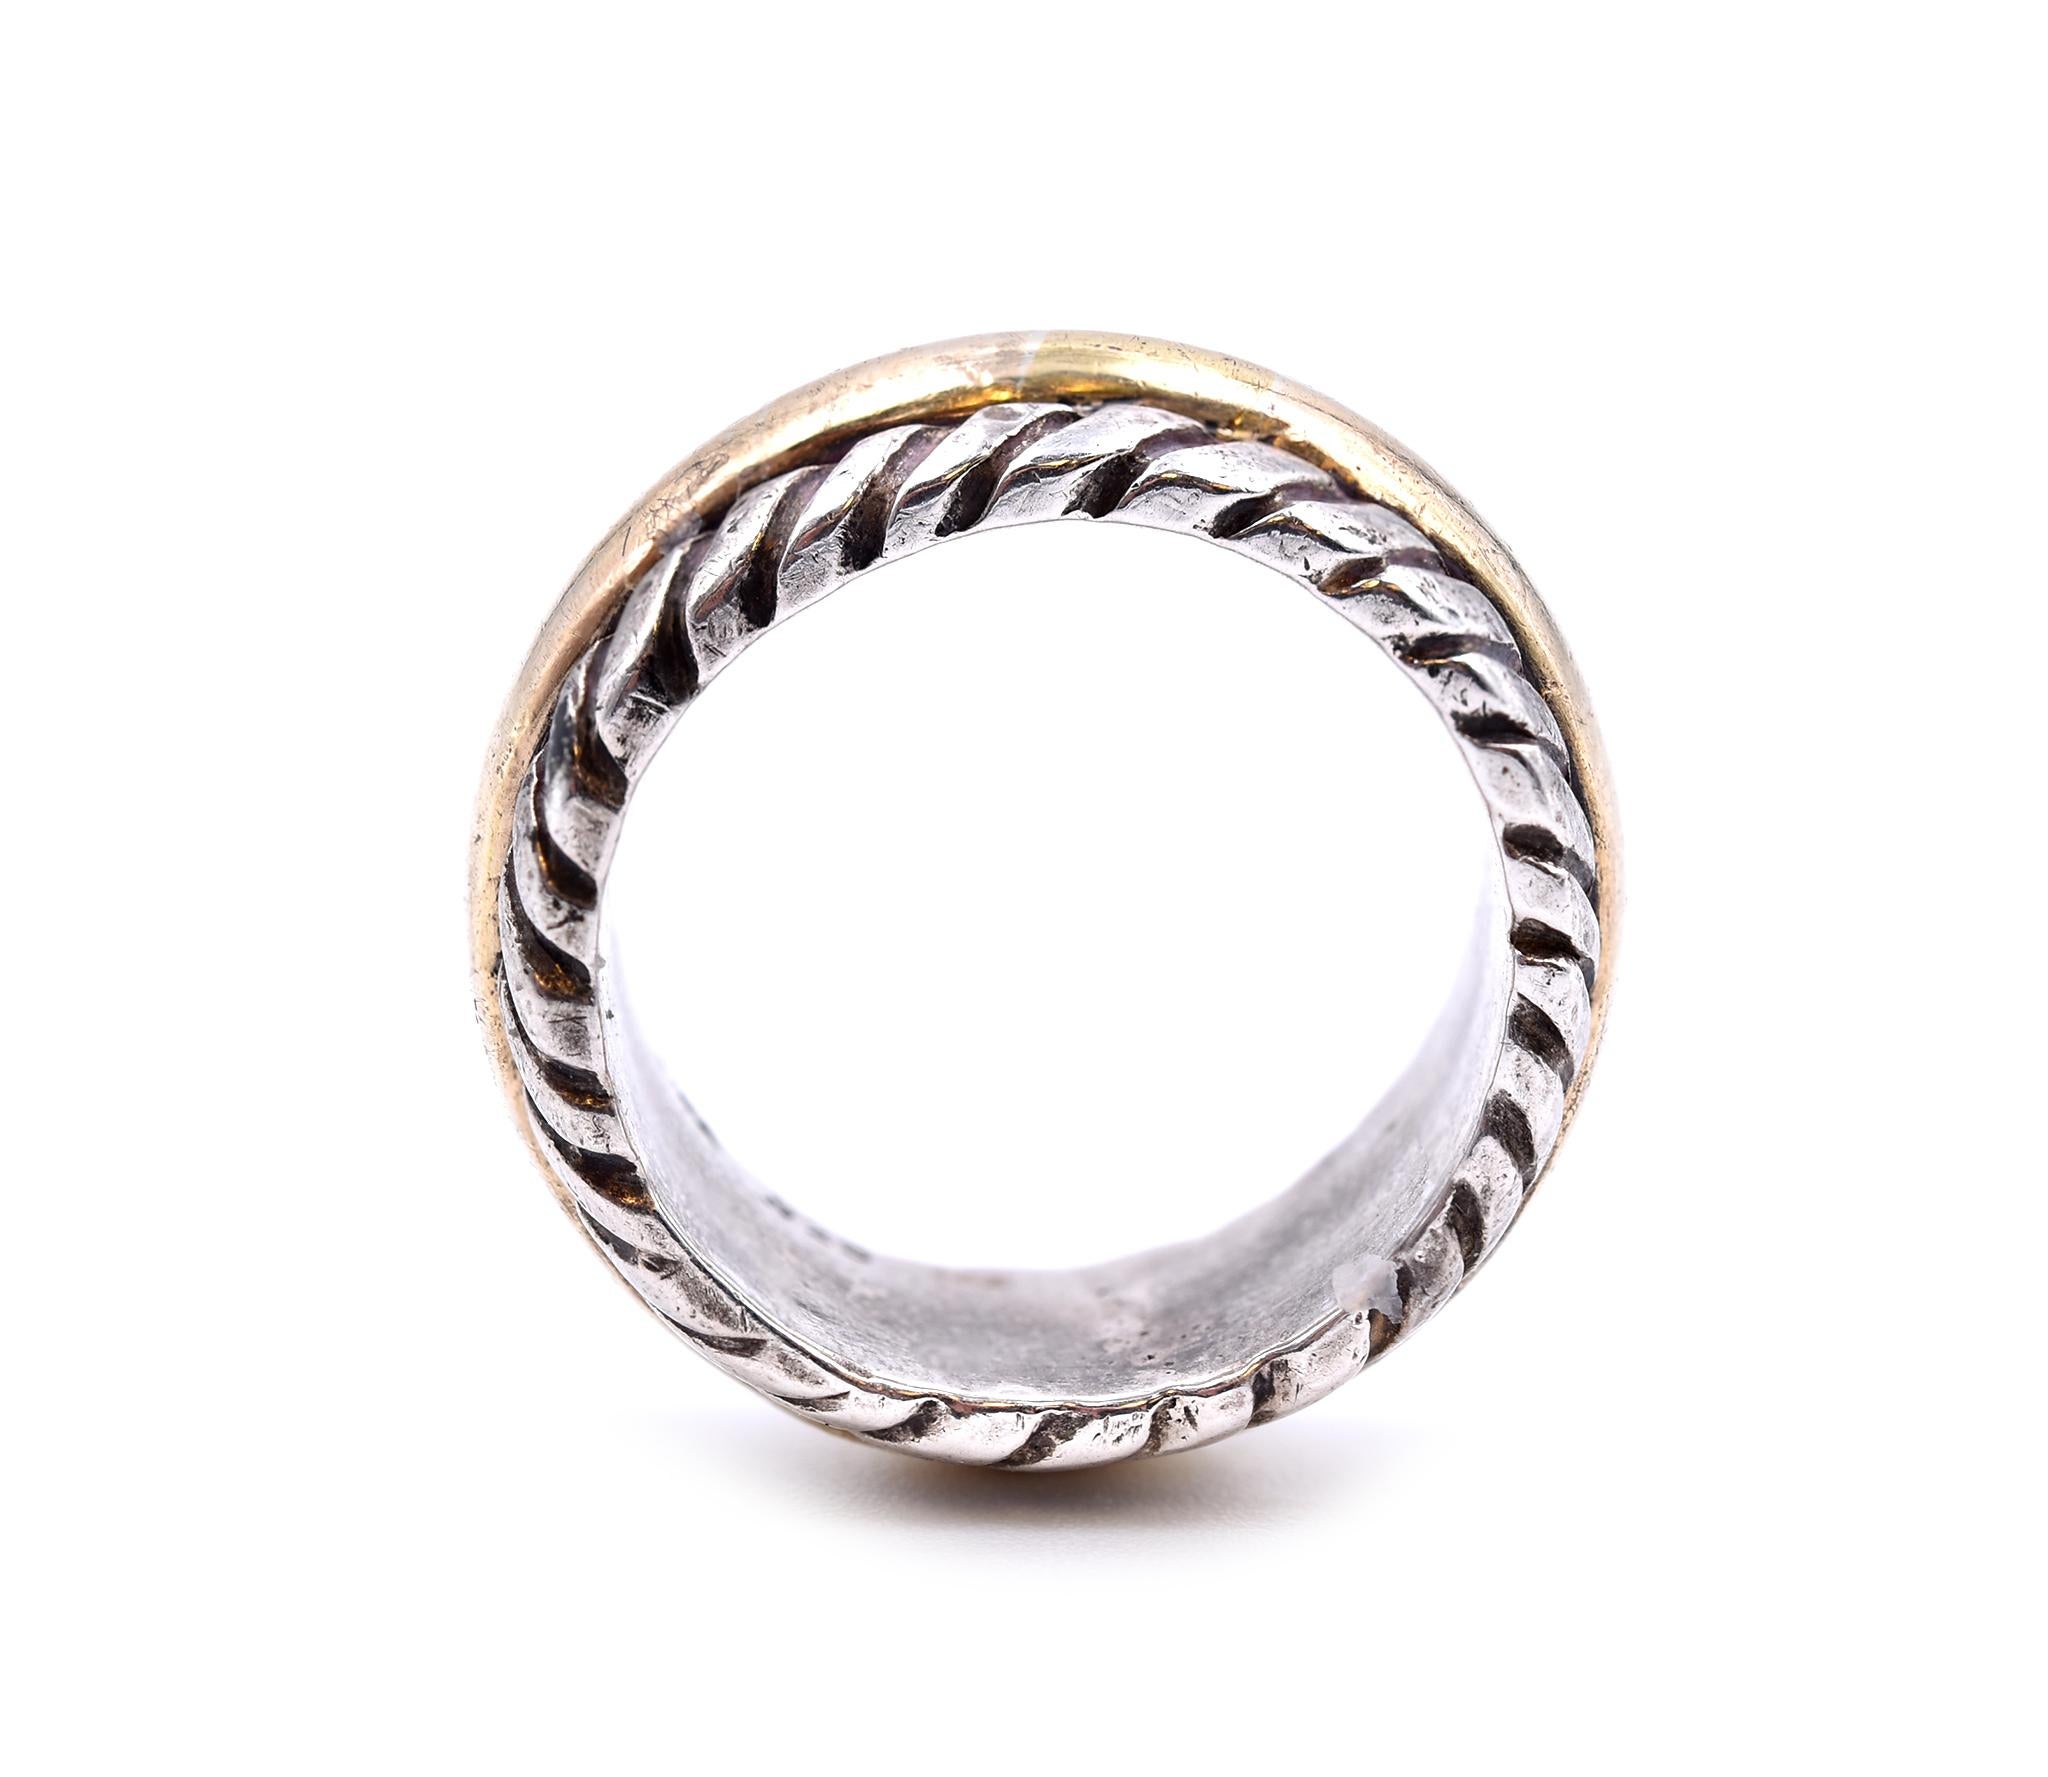 Women's or Men's Sterling Silver and 14 Karat Yellow Gold Cable Ring